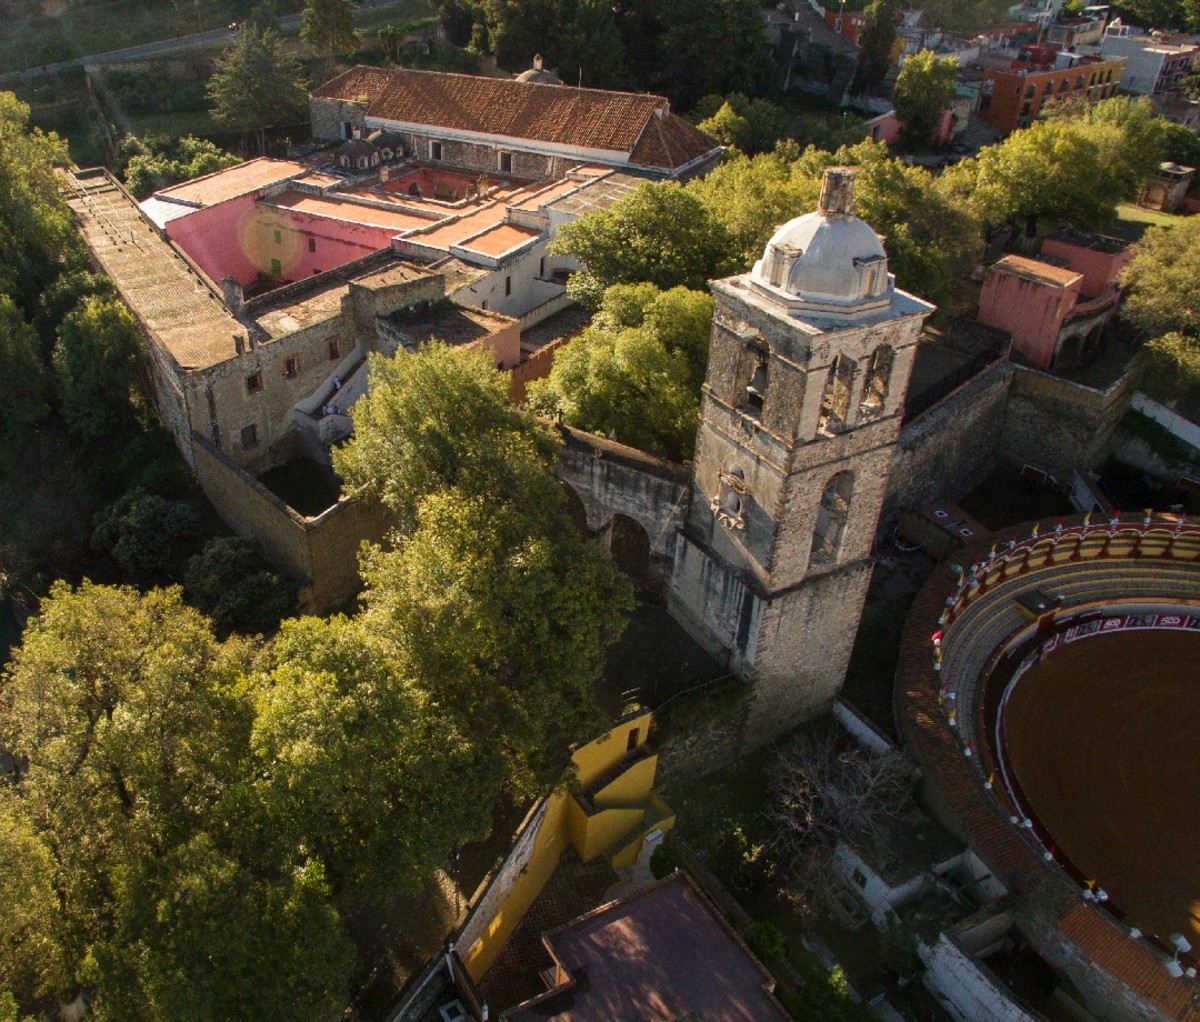 An aerial view of Mexico's Franciscan Ensemble of the Monastery and Cathedral of Our Lady of the Assumption of Tlaxcala.